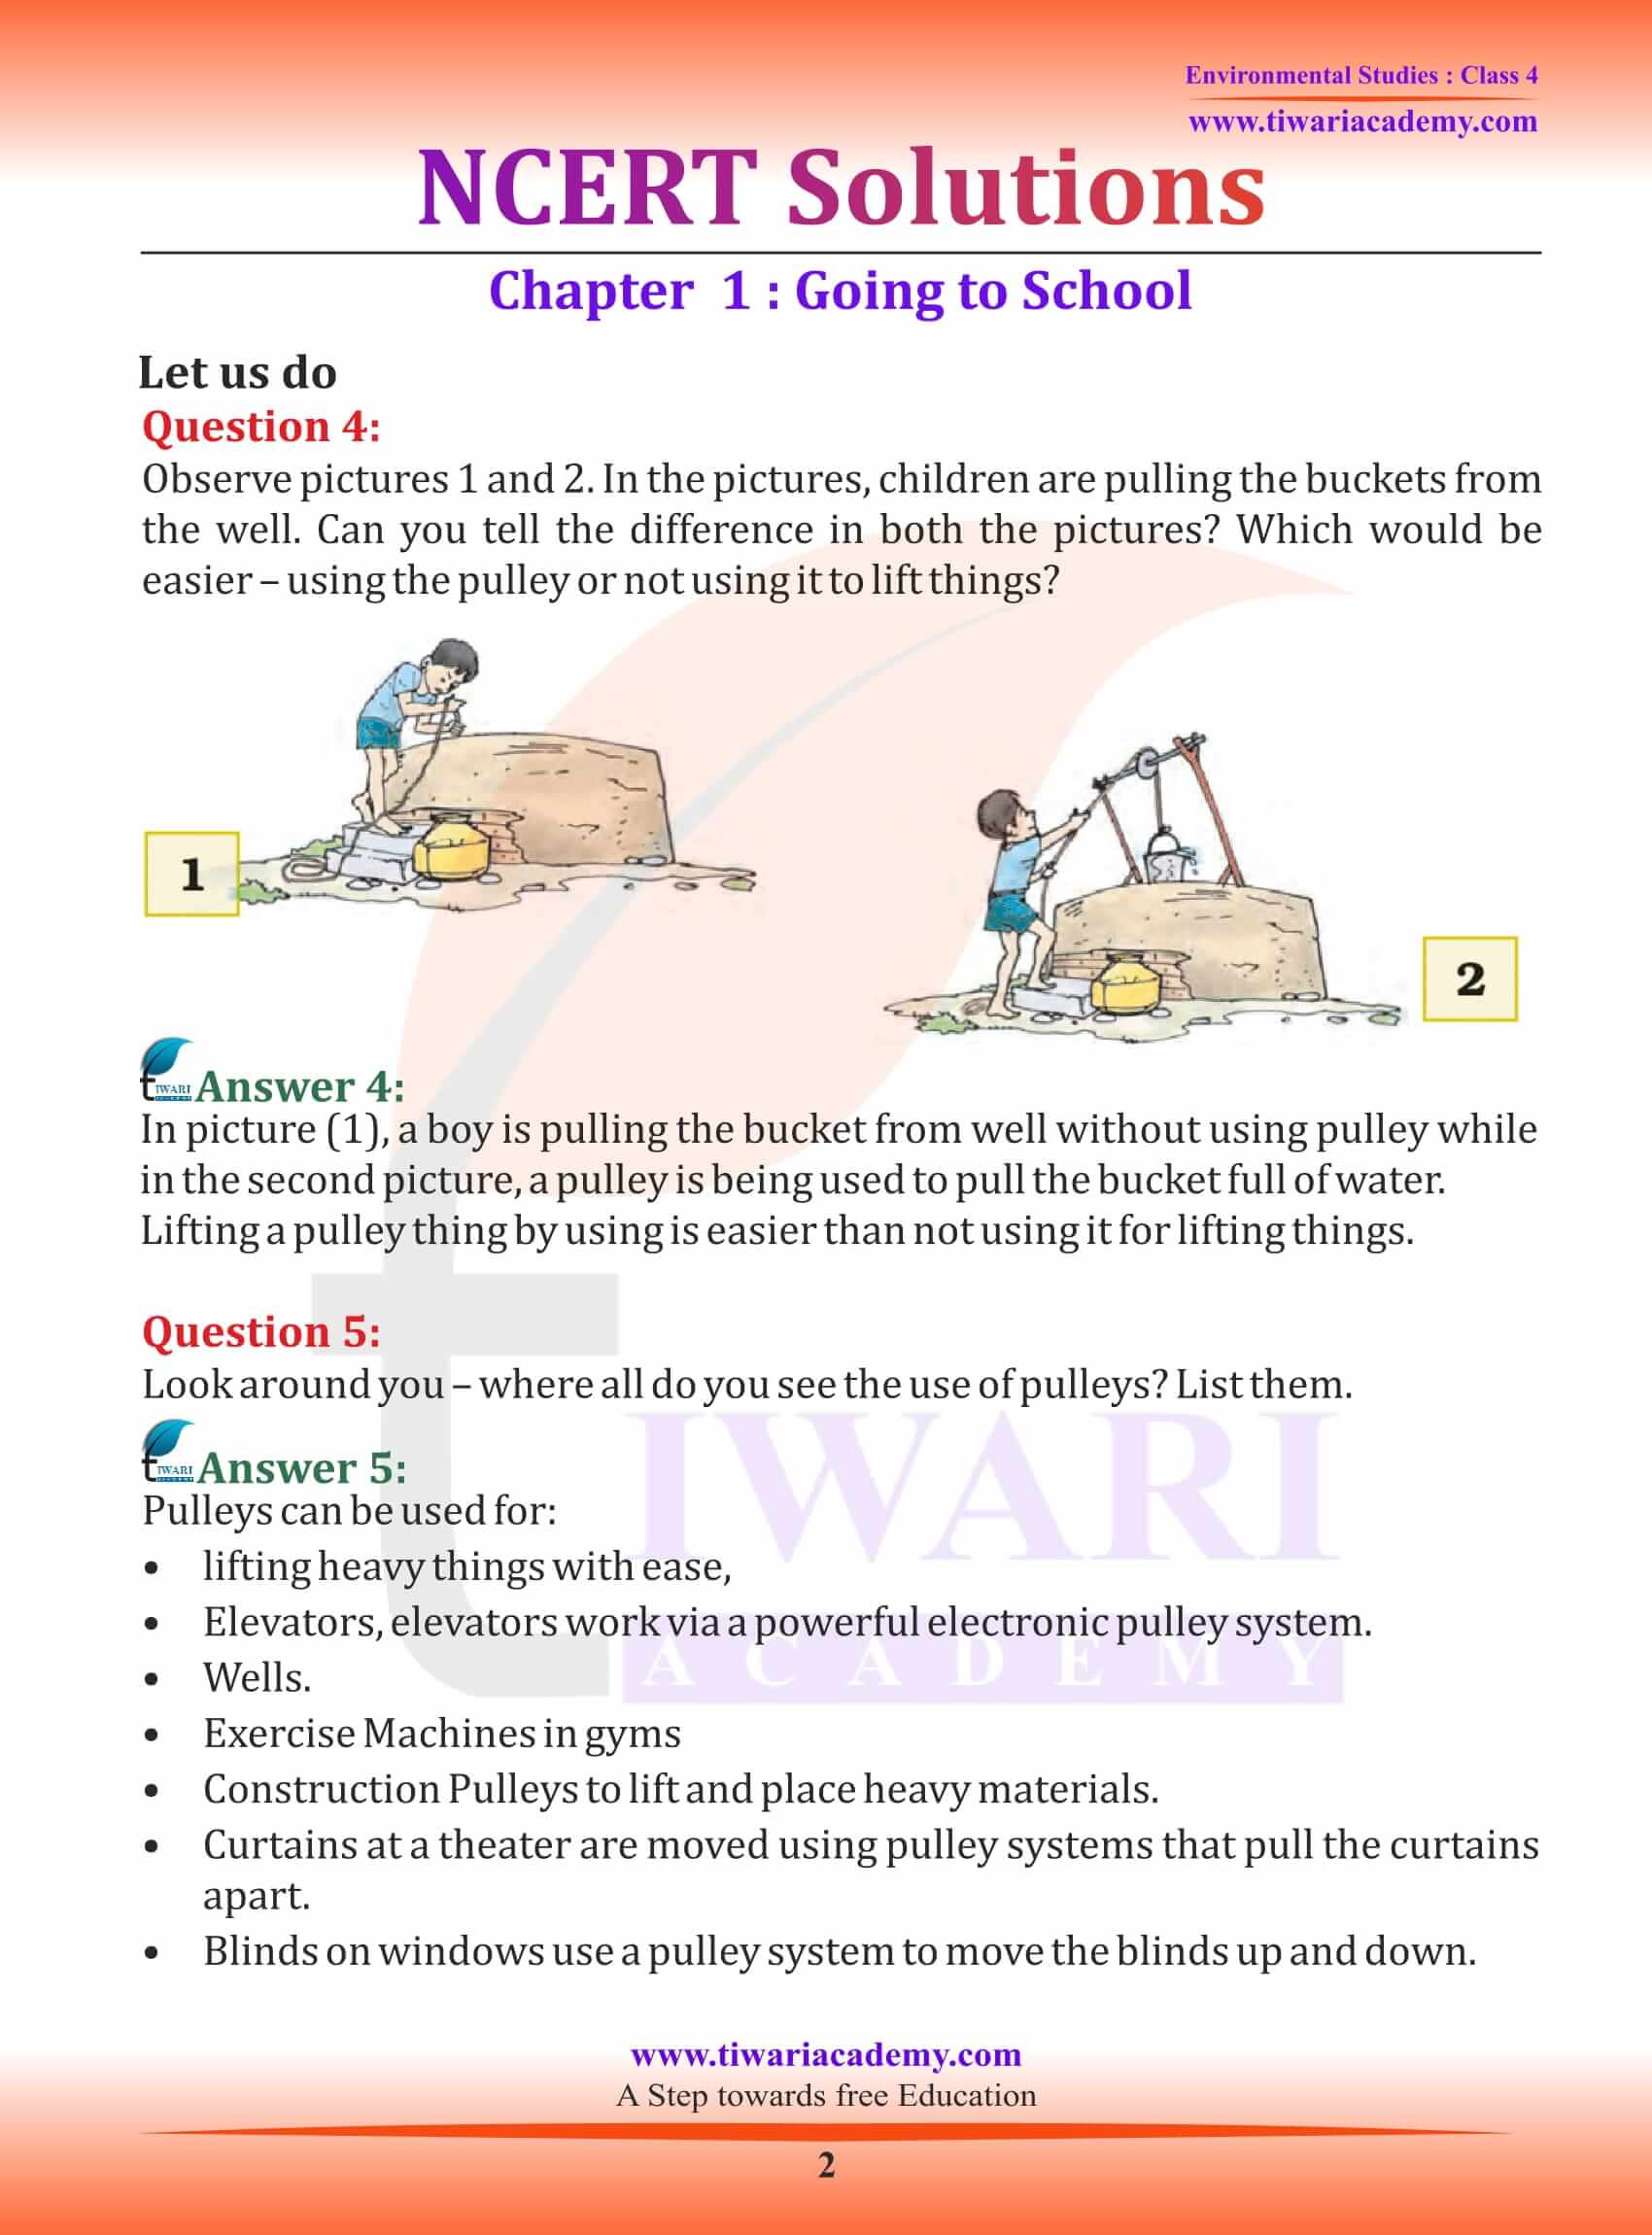 NCERT Solutions for Class 4 EVS Chapter 1